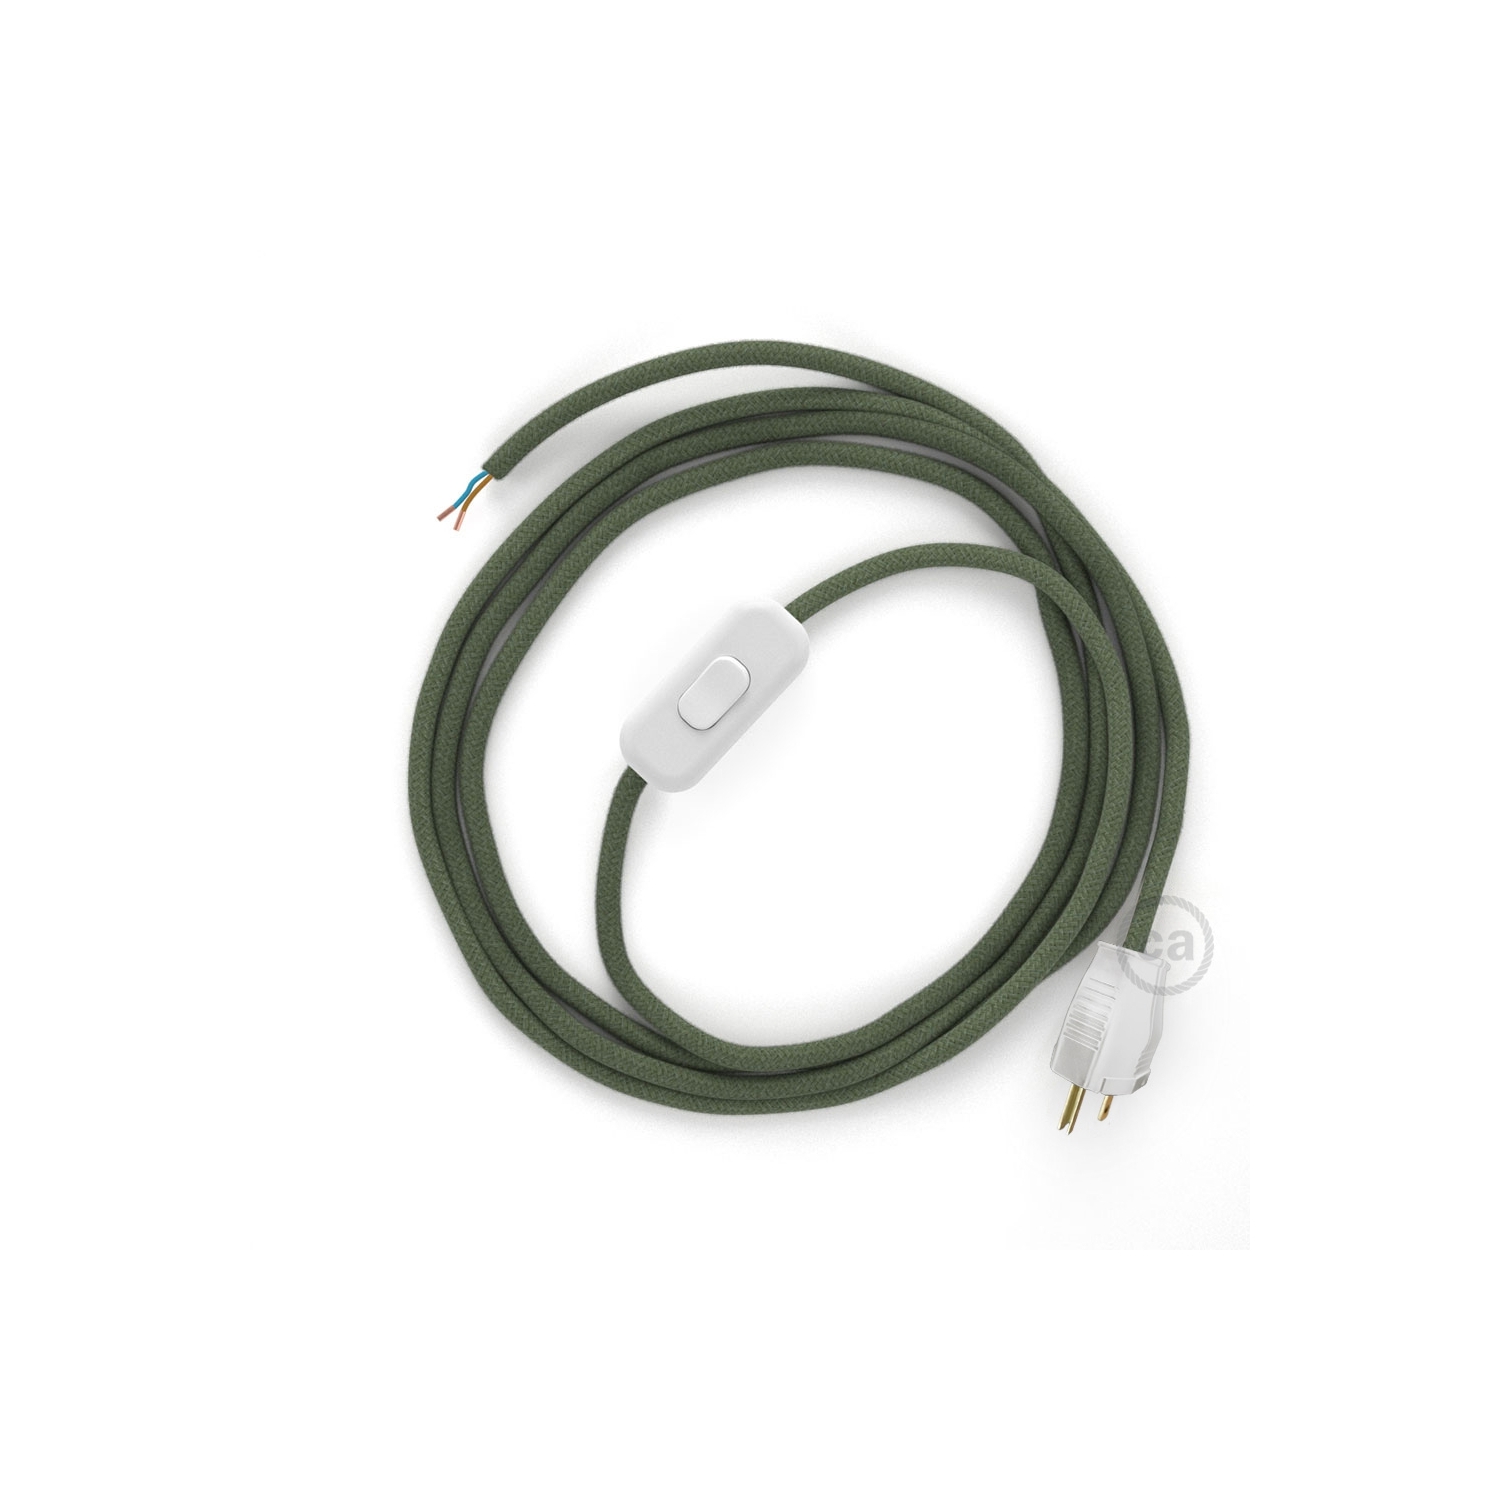 Power Cord with in-line switch, RC63 Gray Green Cotton - Choose color of switch/plug